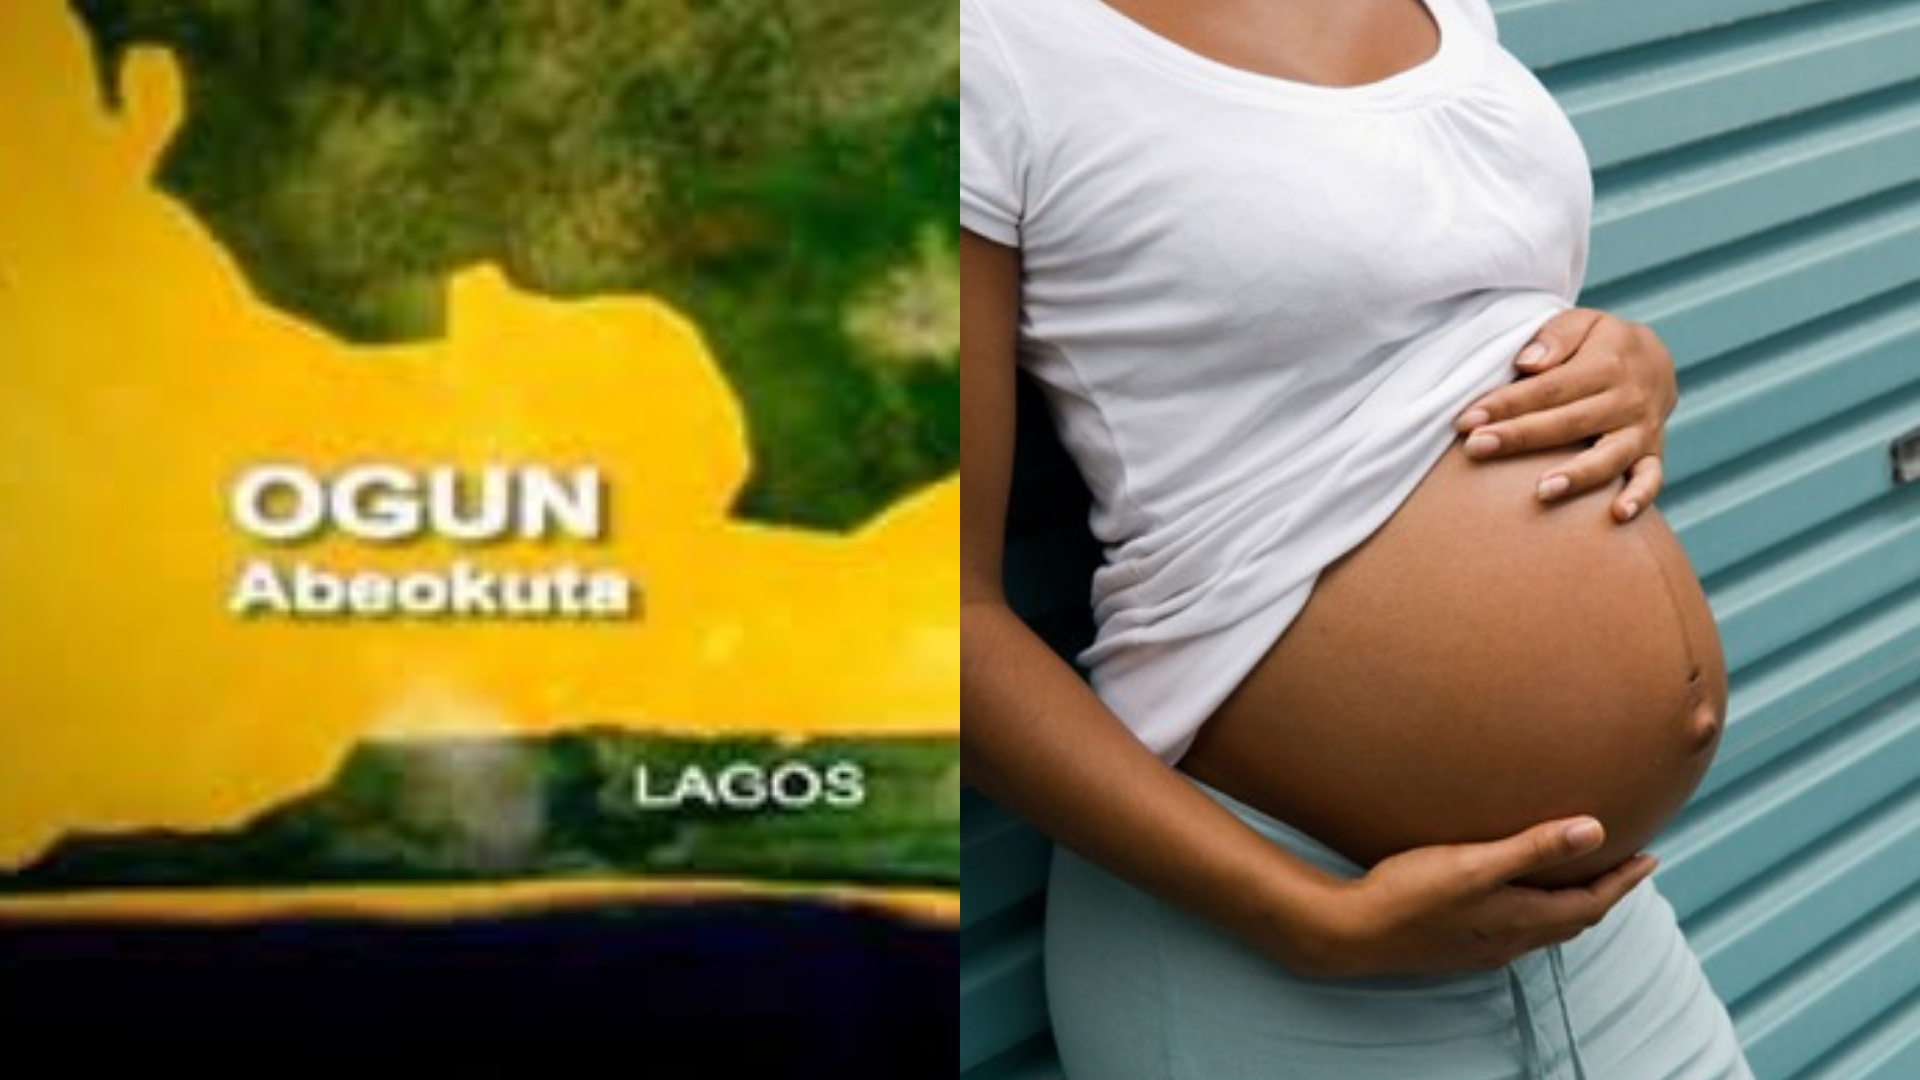 Man arrested for impregnating 19-year-old daughter in Ogun State